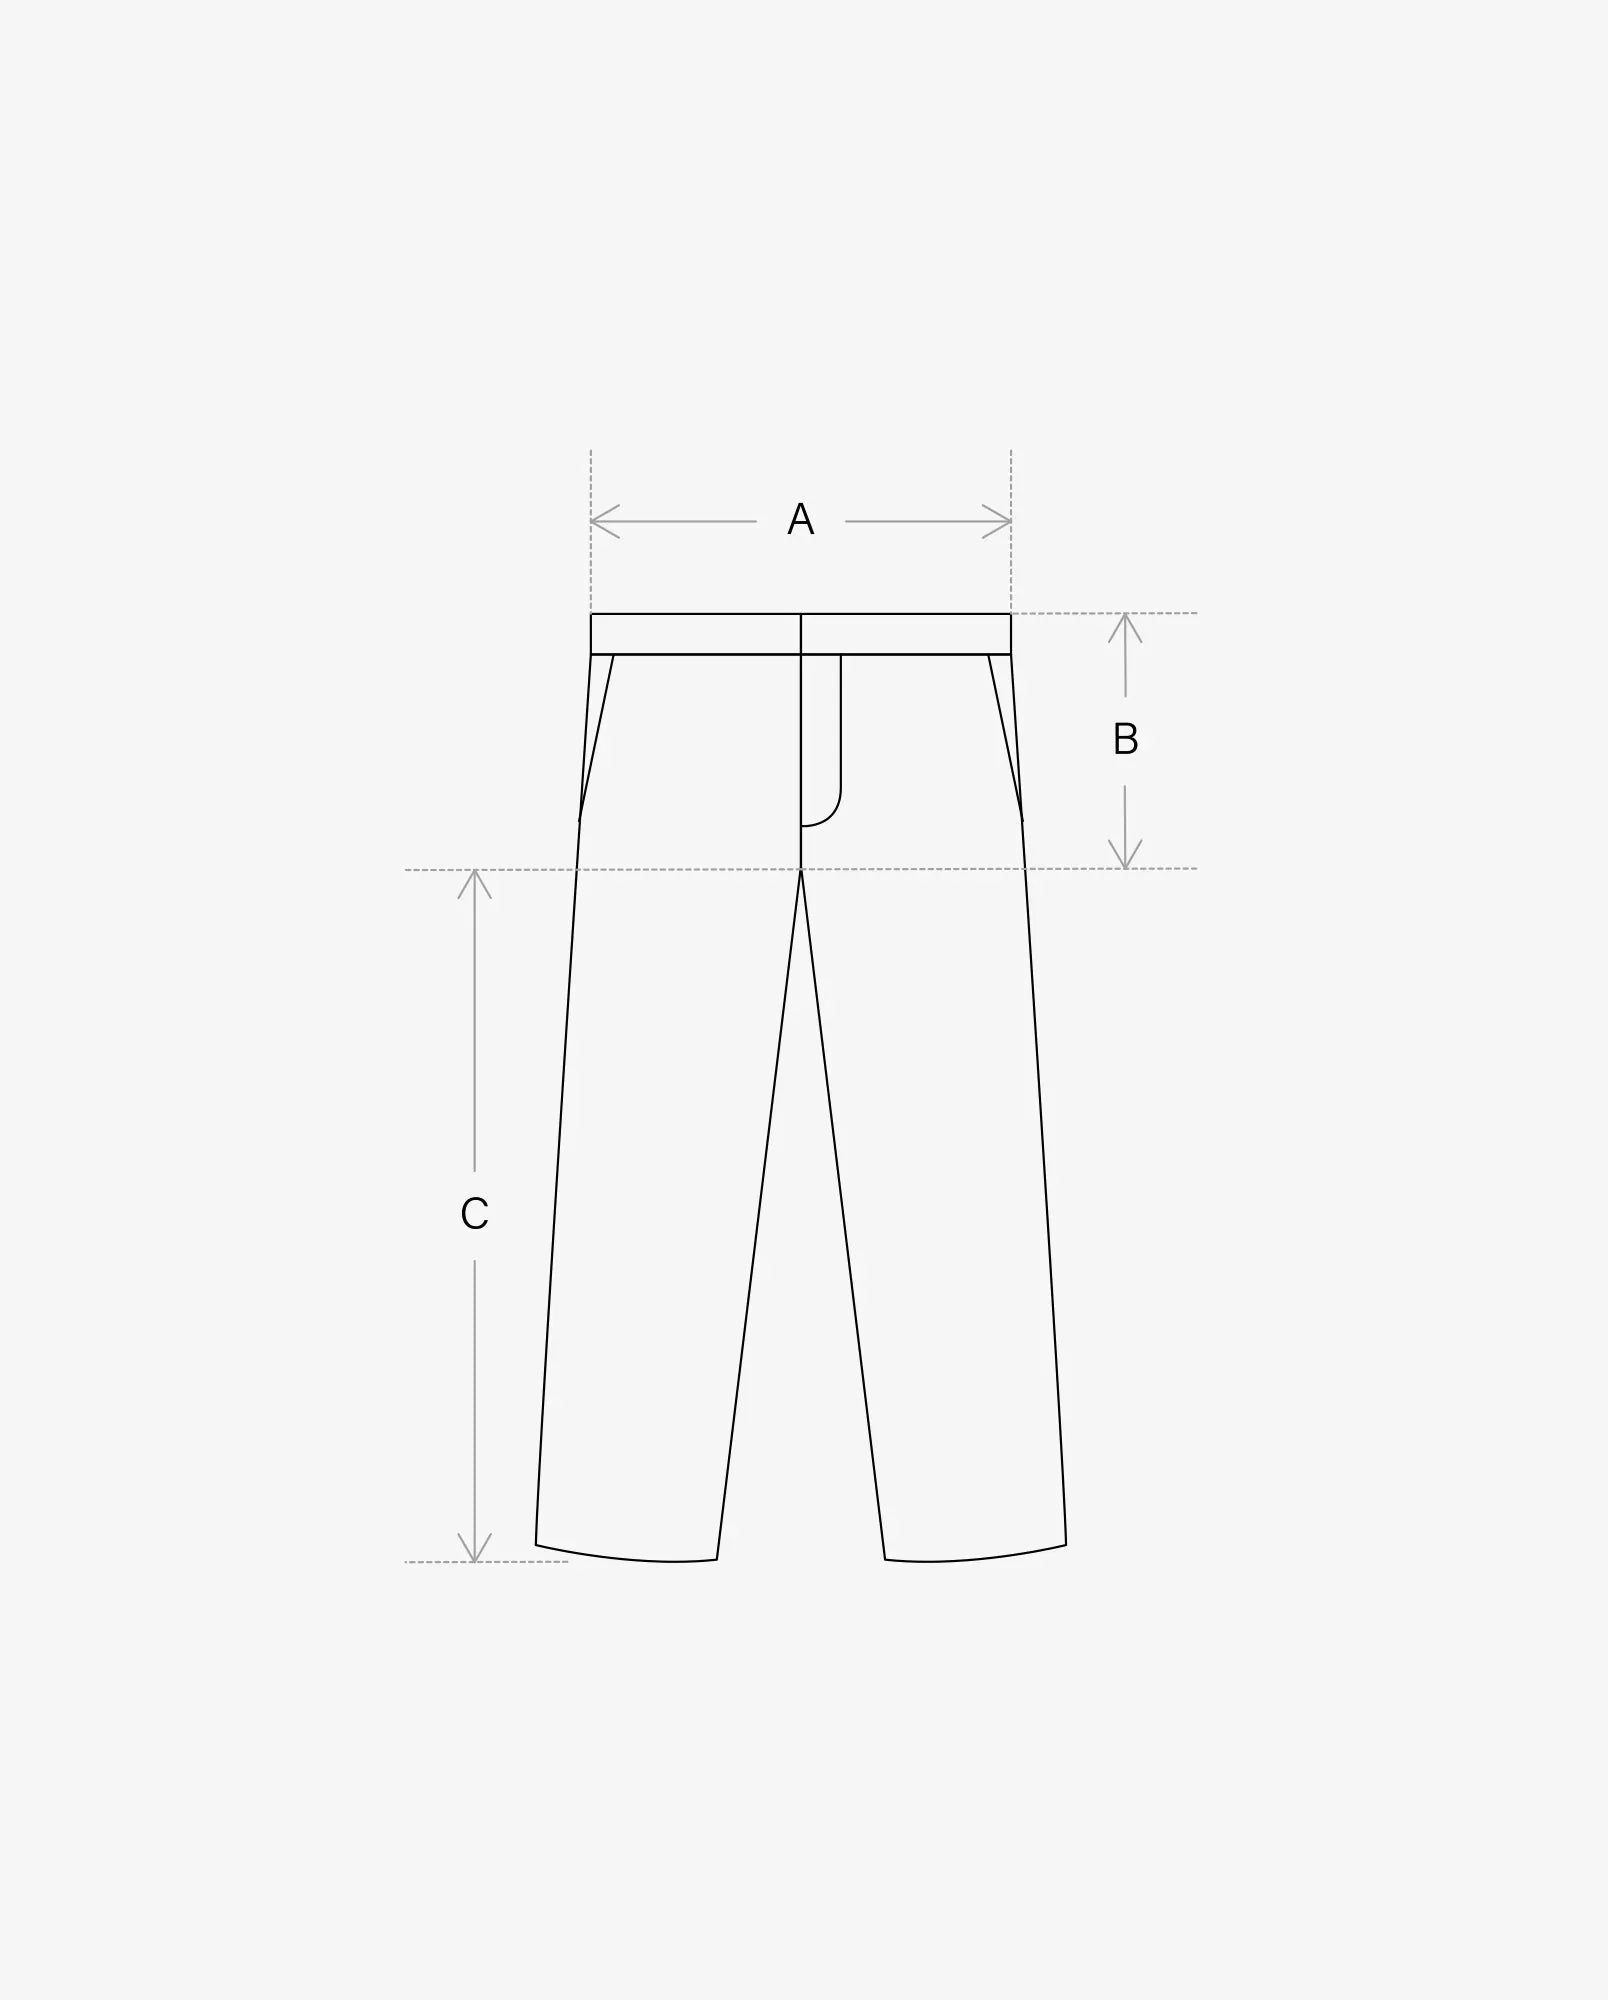 British Military Fatigue Trousers